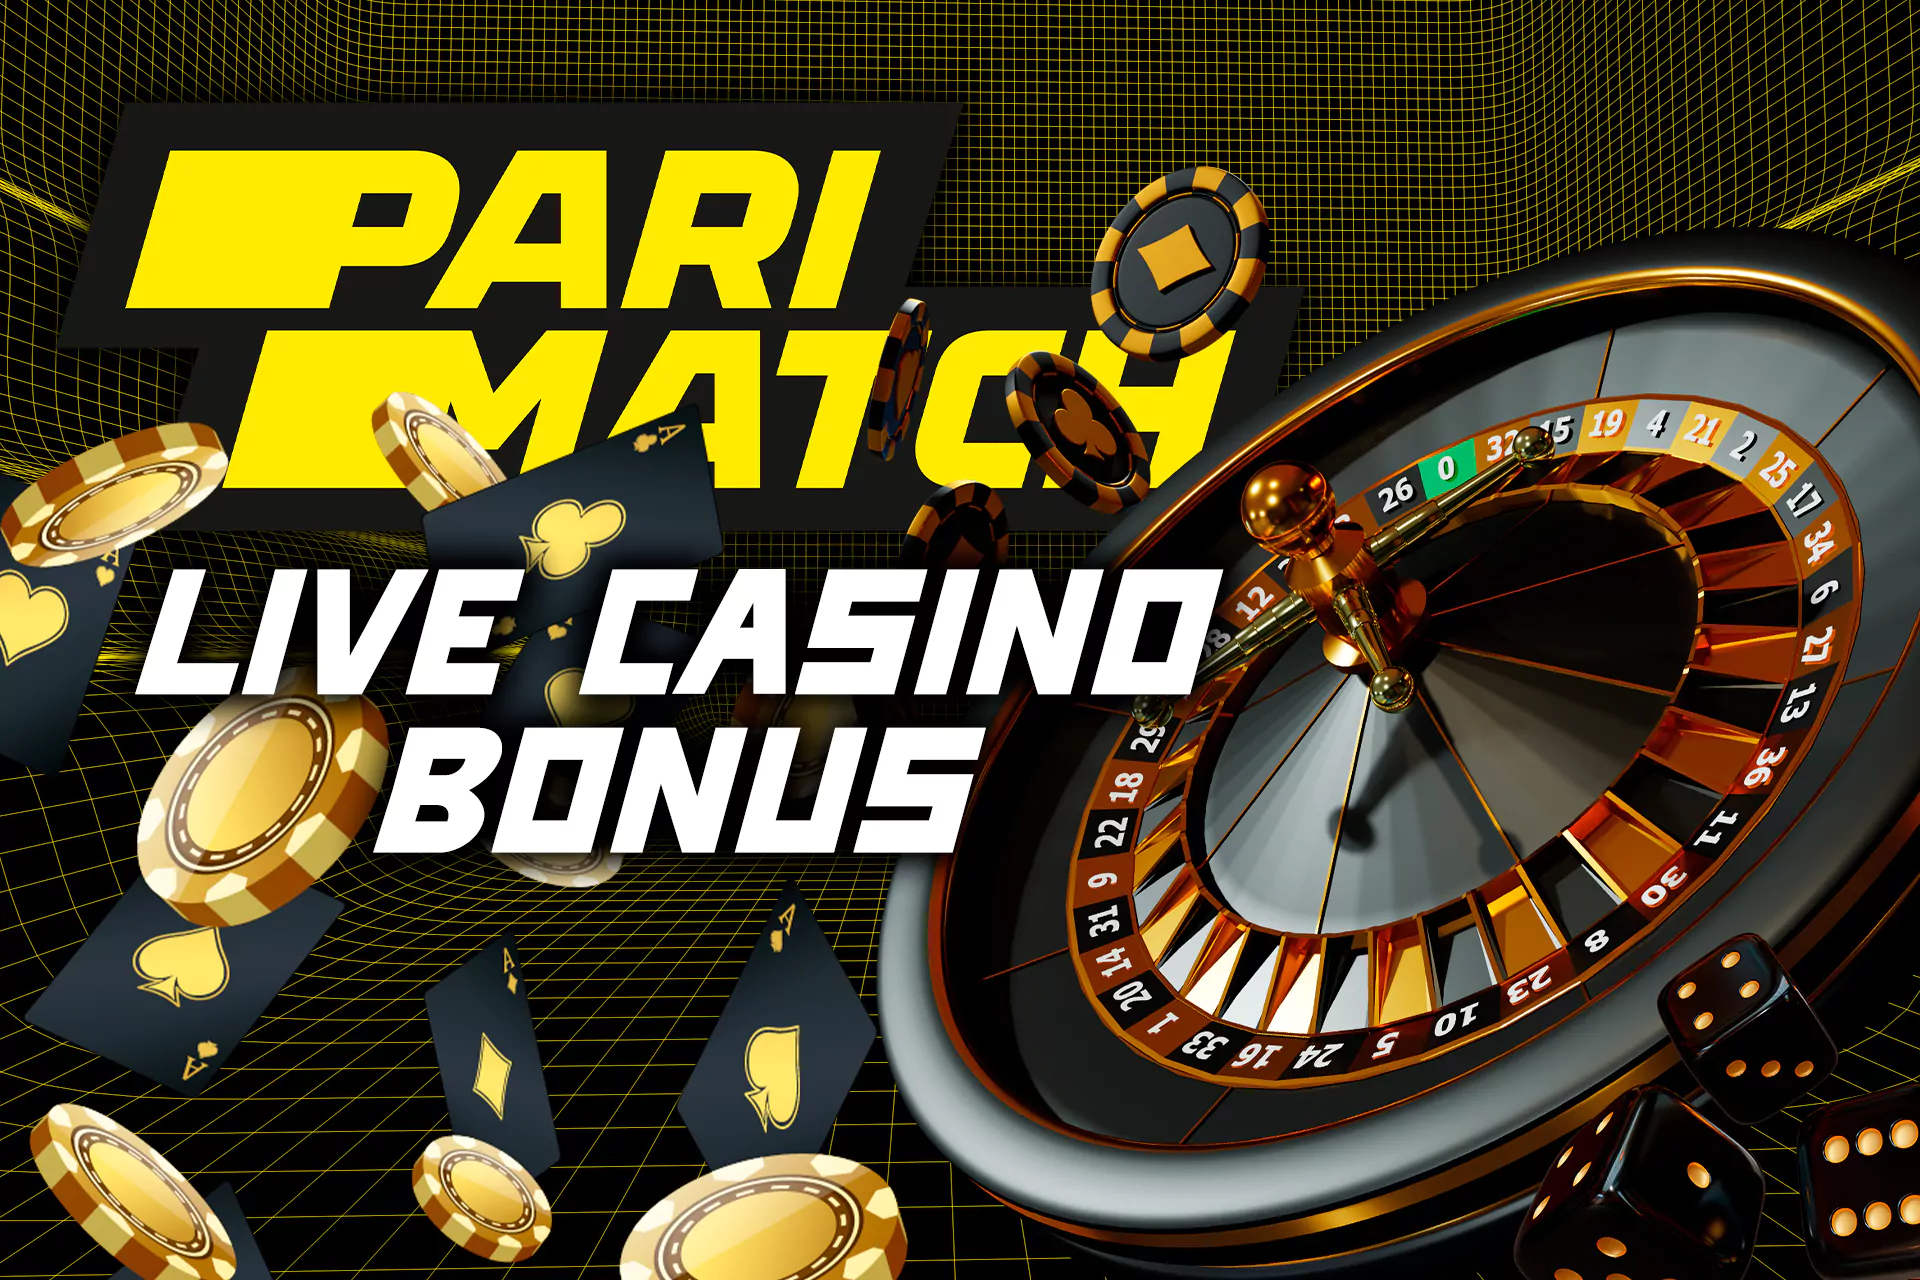 In some games of the Parimatch Live Casino, you can take part in a tournament with a jackpot.